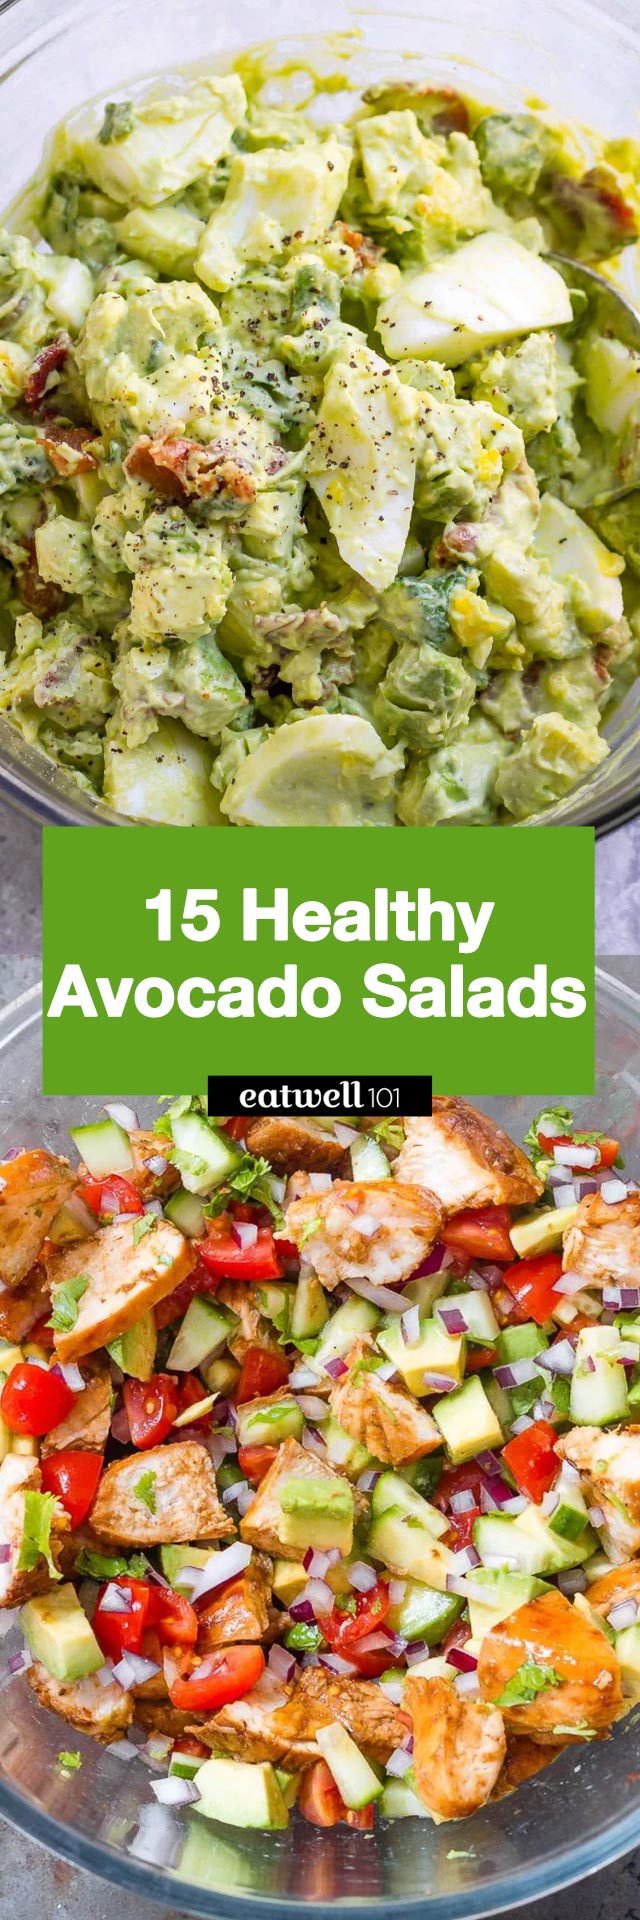 Avocado salad recipes - #avocado #salad #eatwell101 #recipes - Looking for more ways to get your avocado fix? Try these next-level salads full of healthy avocado!